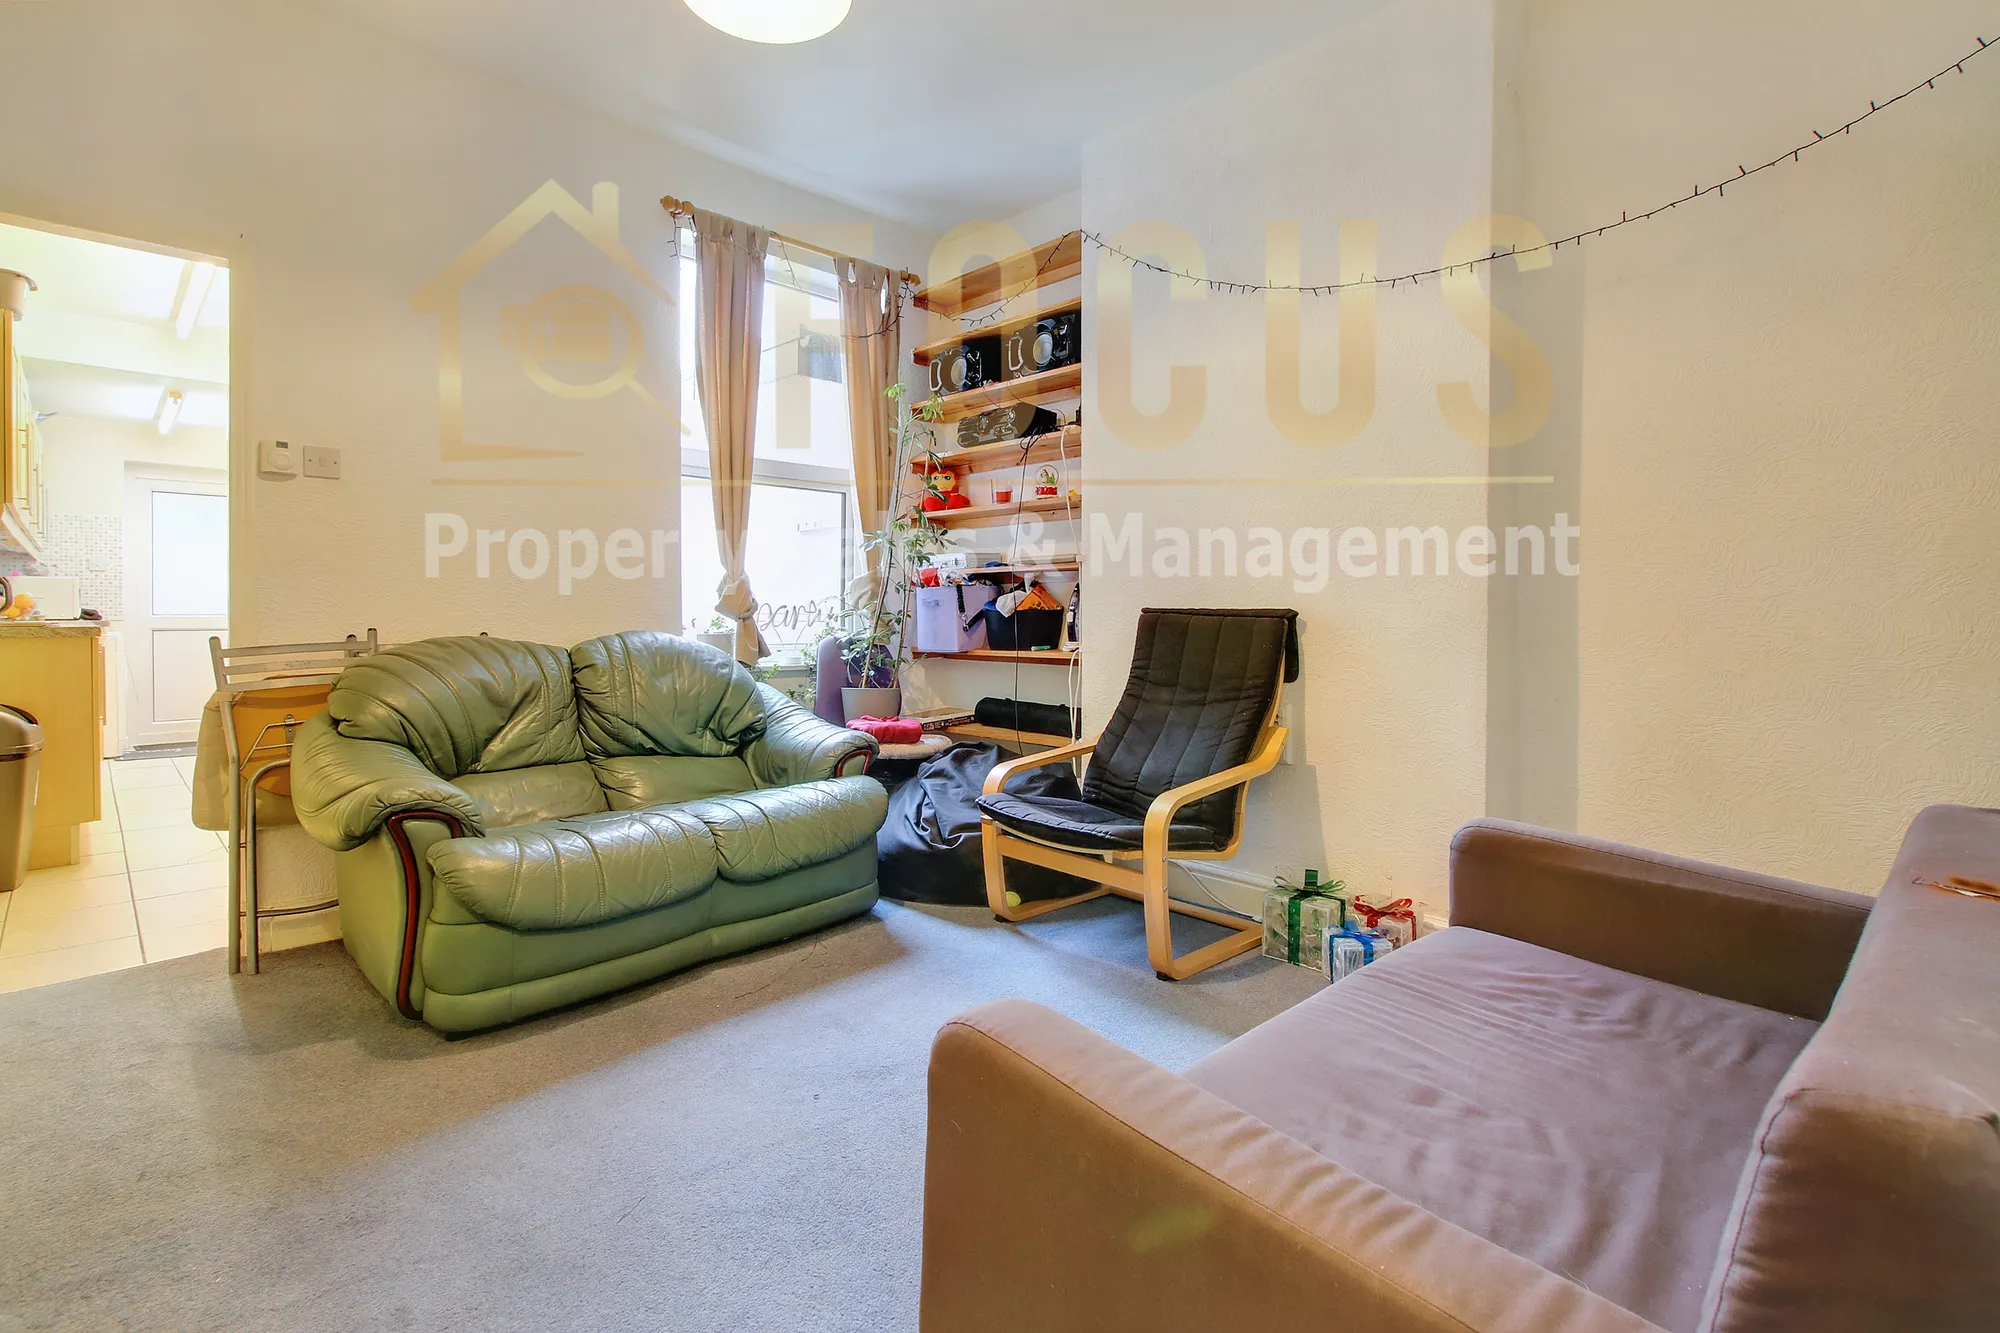 3 bed terraced house to rent in Hartopp Road, Leicester - Property Image 1